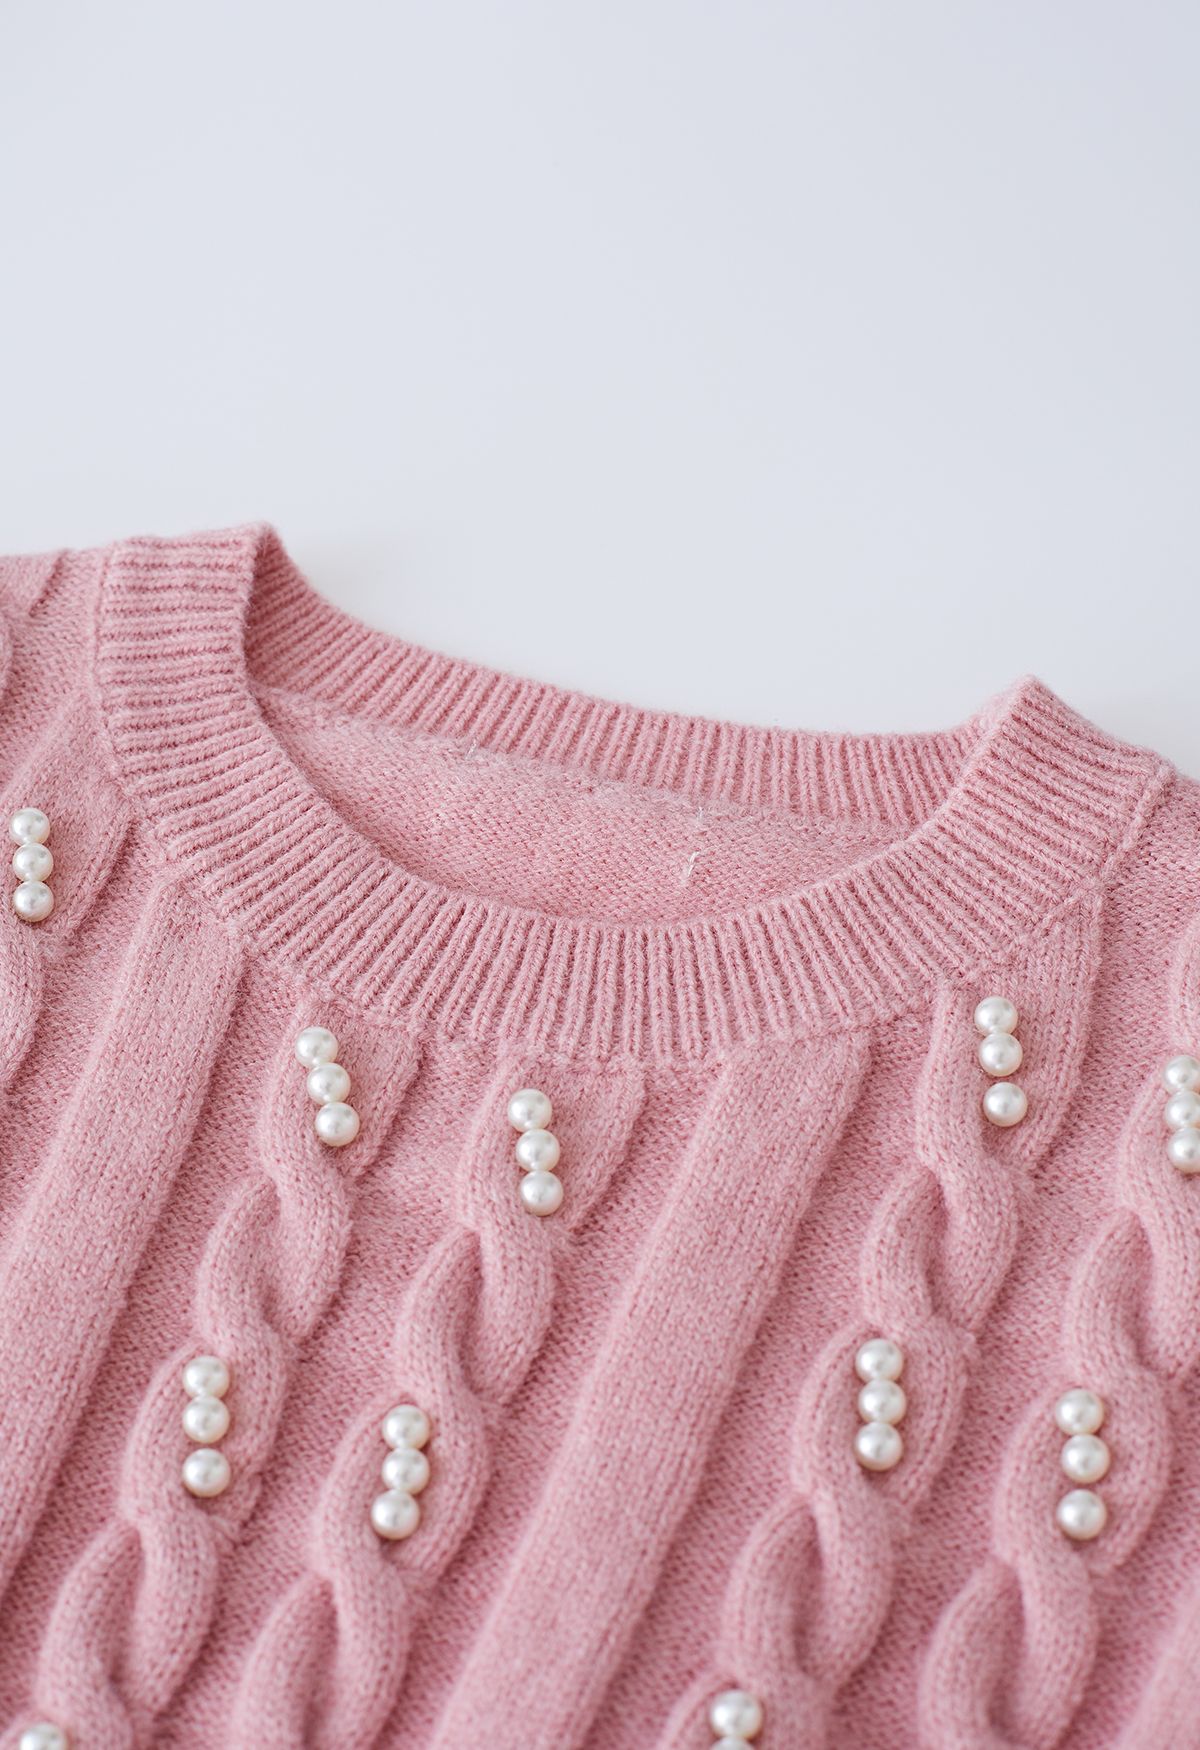 Pearl Embellished Braid Knit Top in Pink